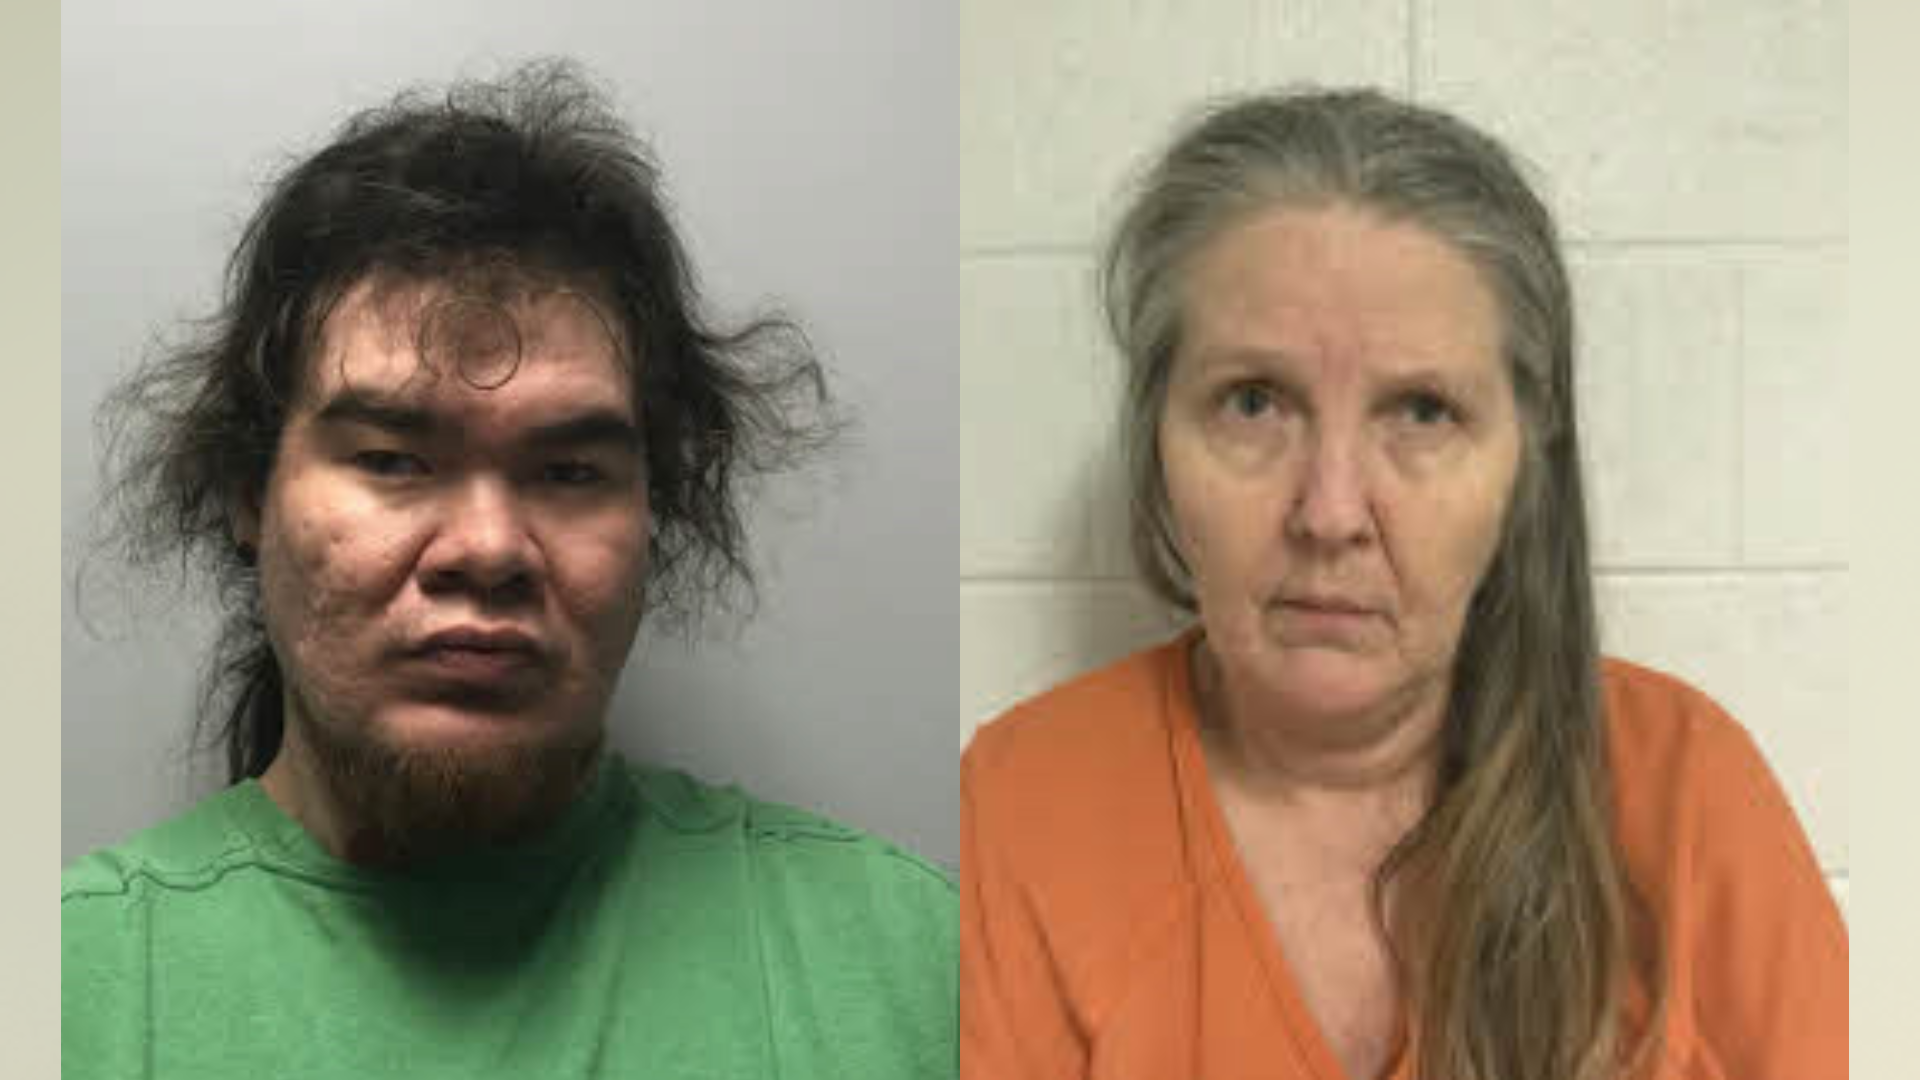 Deputies investigating death in Haywood County, suspects charged